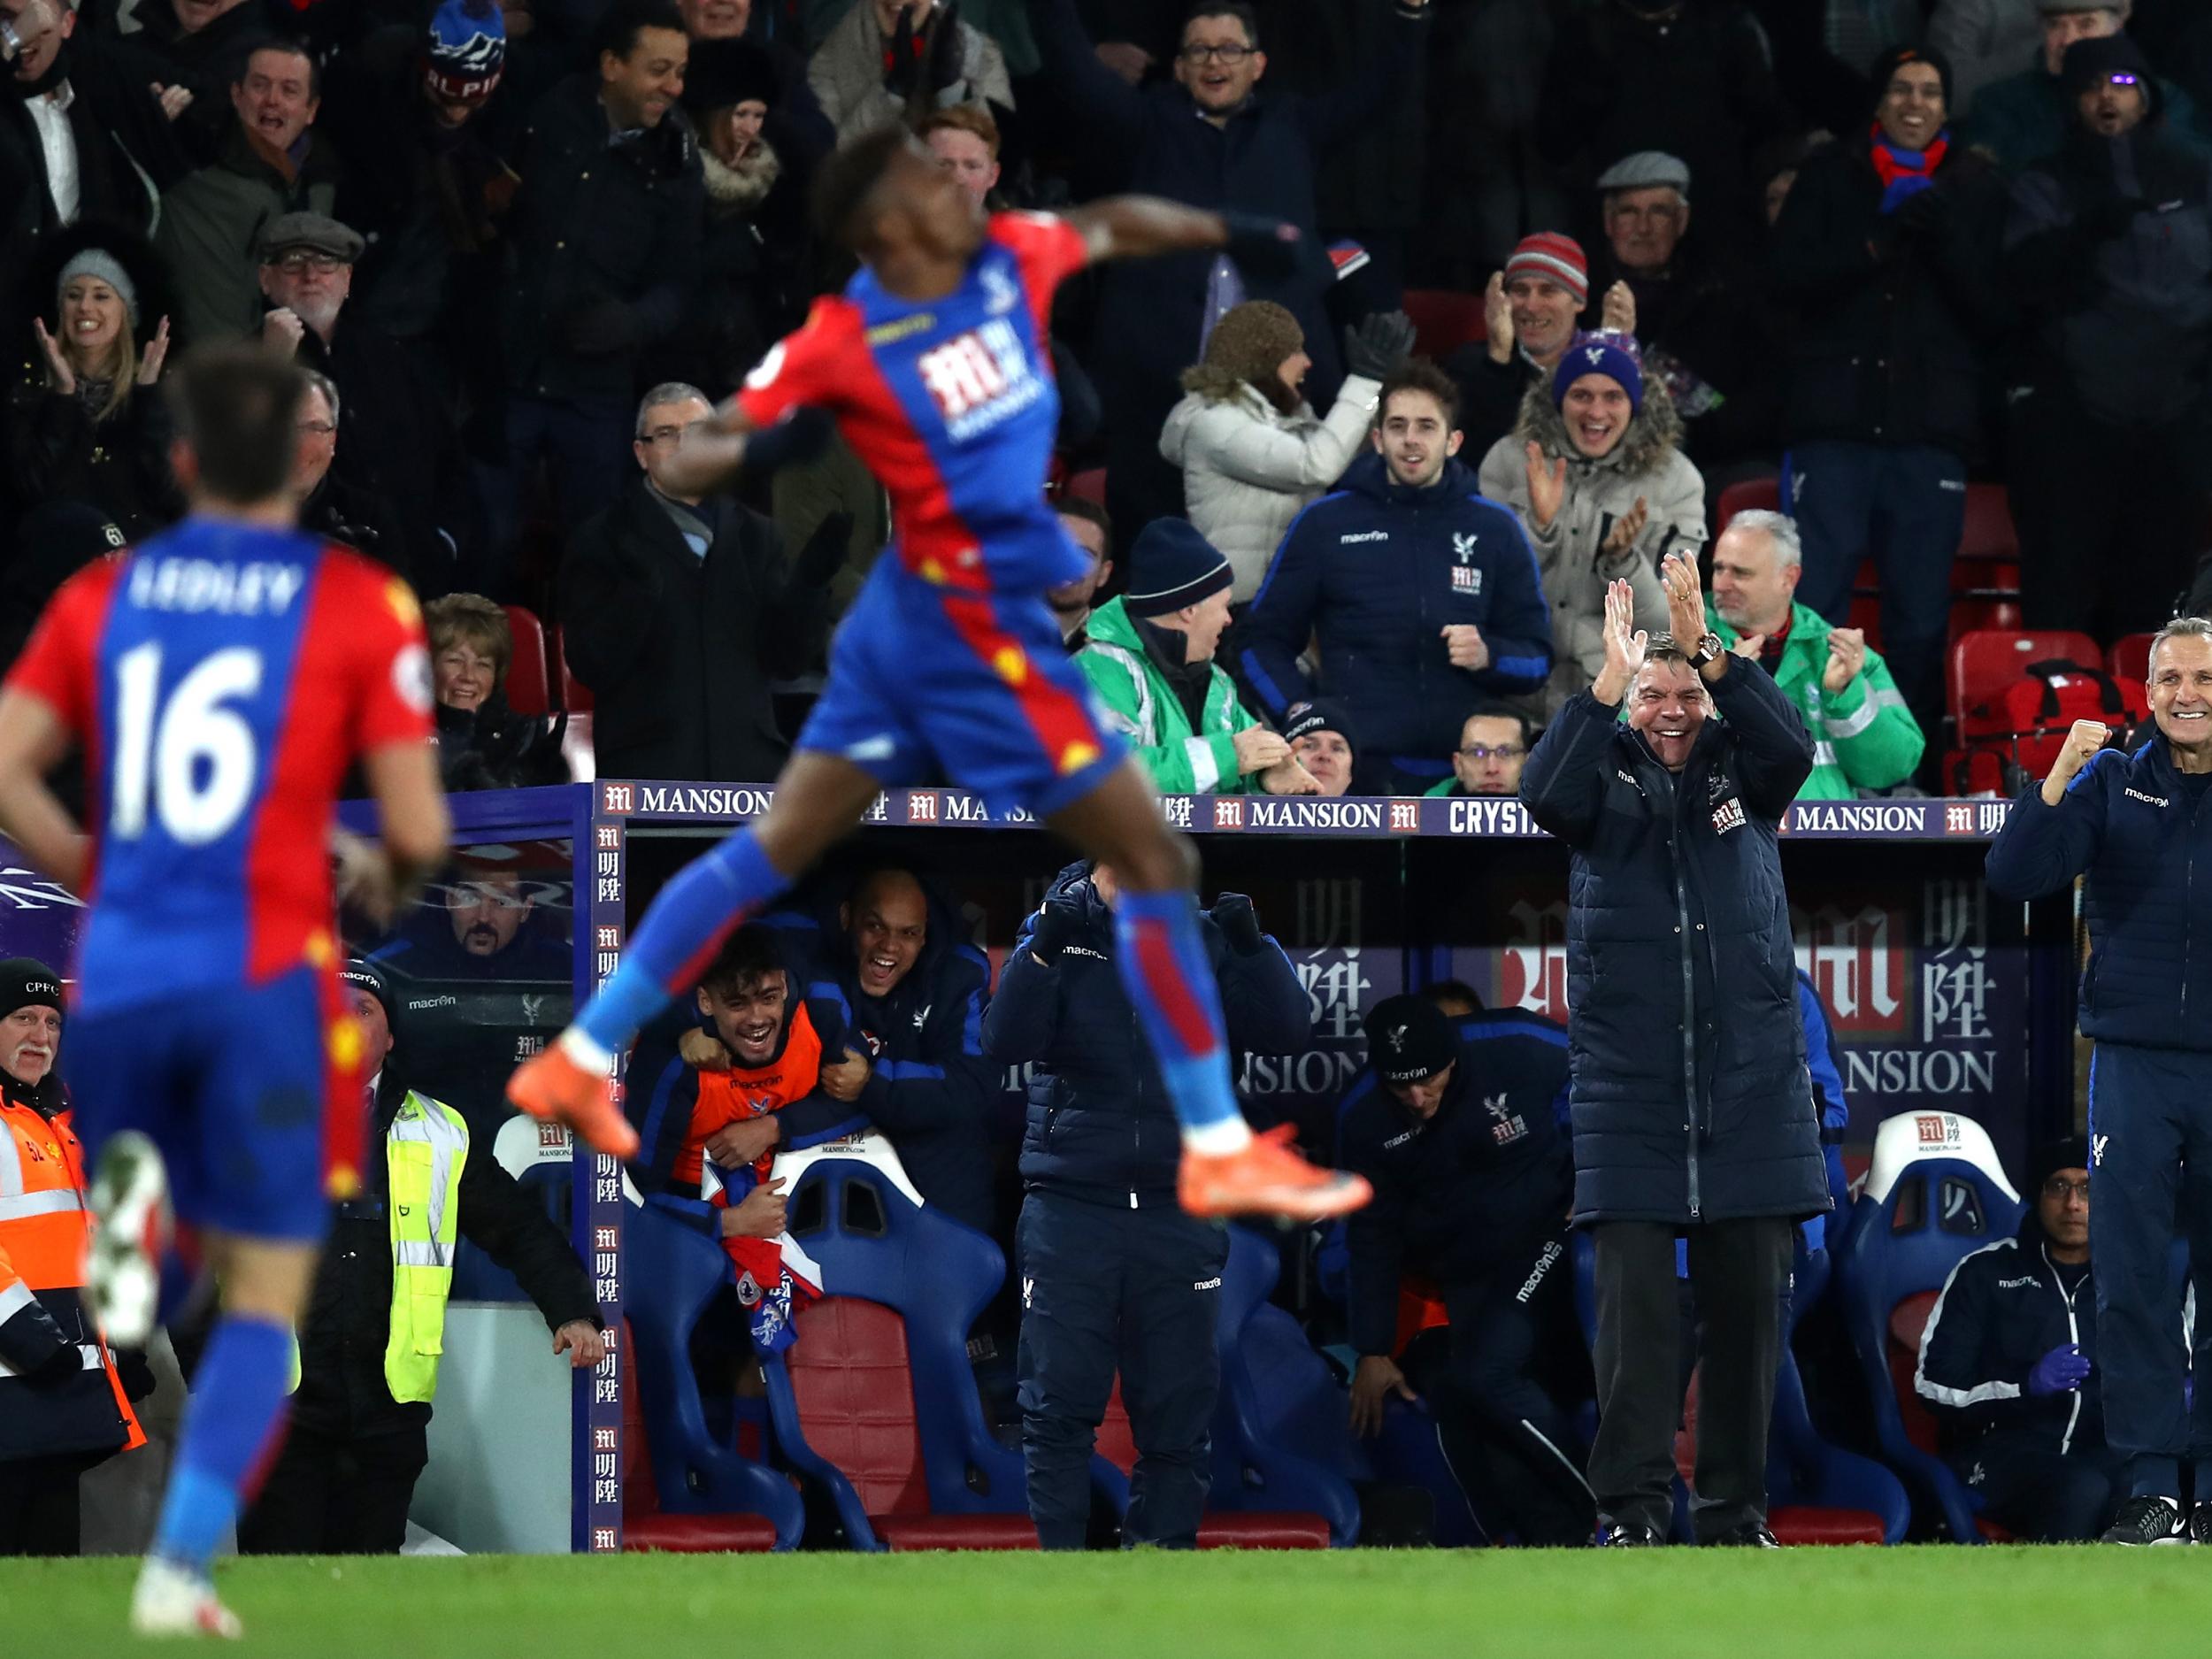 Zaha, who scored a stunner against Swansea, will be missed by Palace